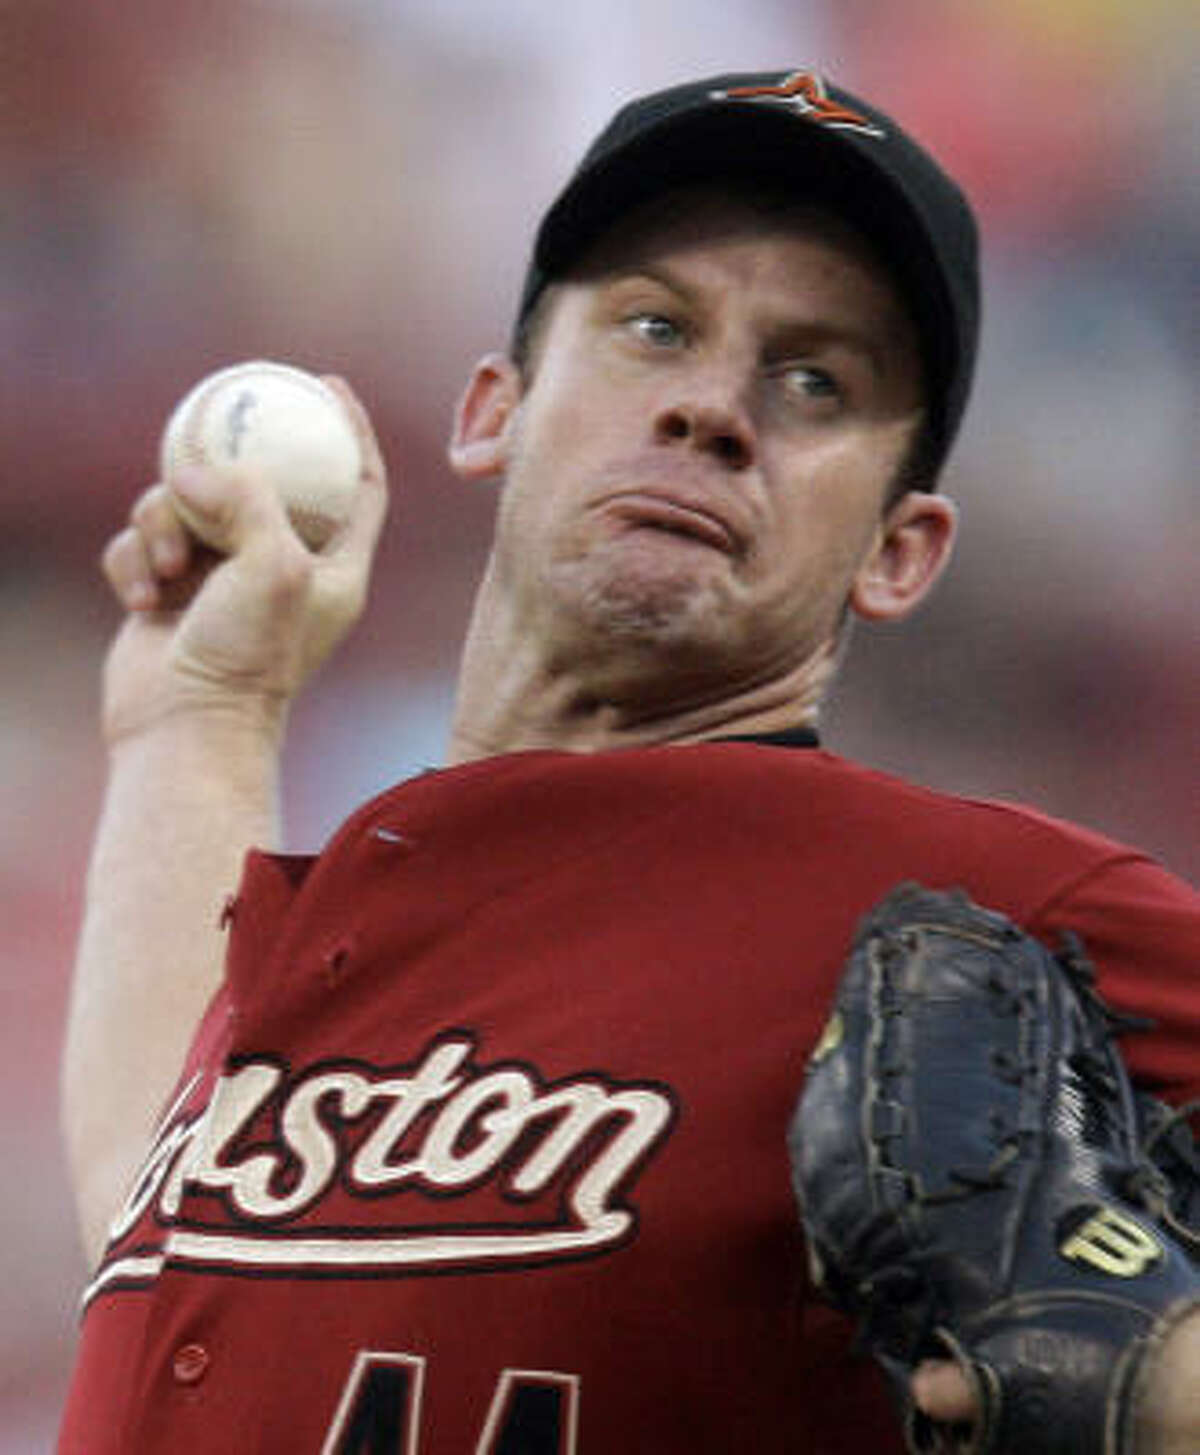 Astros starter Roy Oswalt pitches against the Reds in the first inning at Great American Ball Park in Cincinnati.